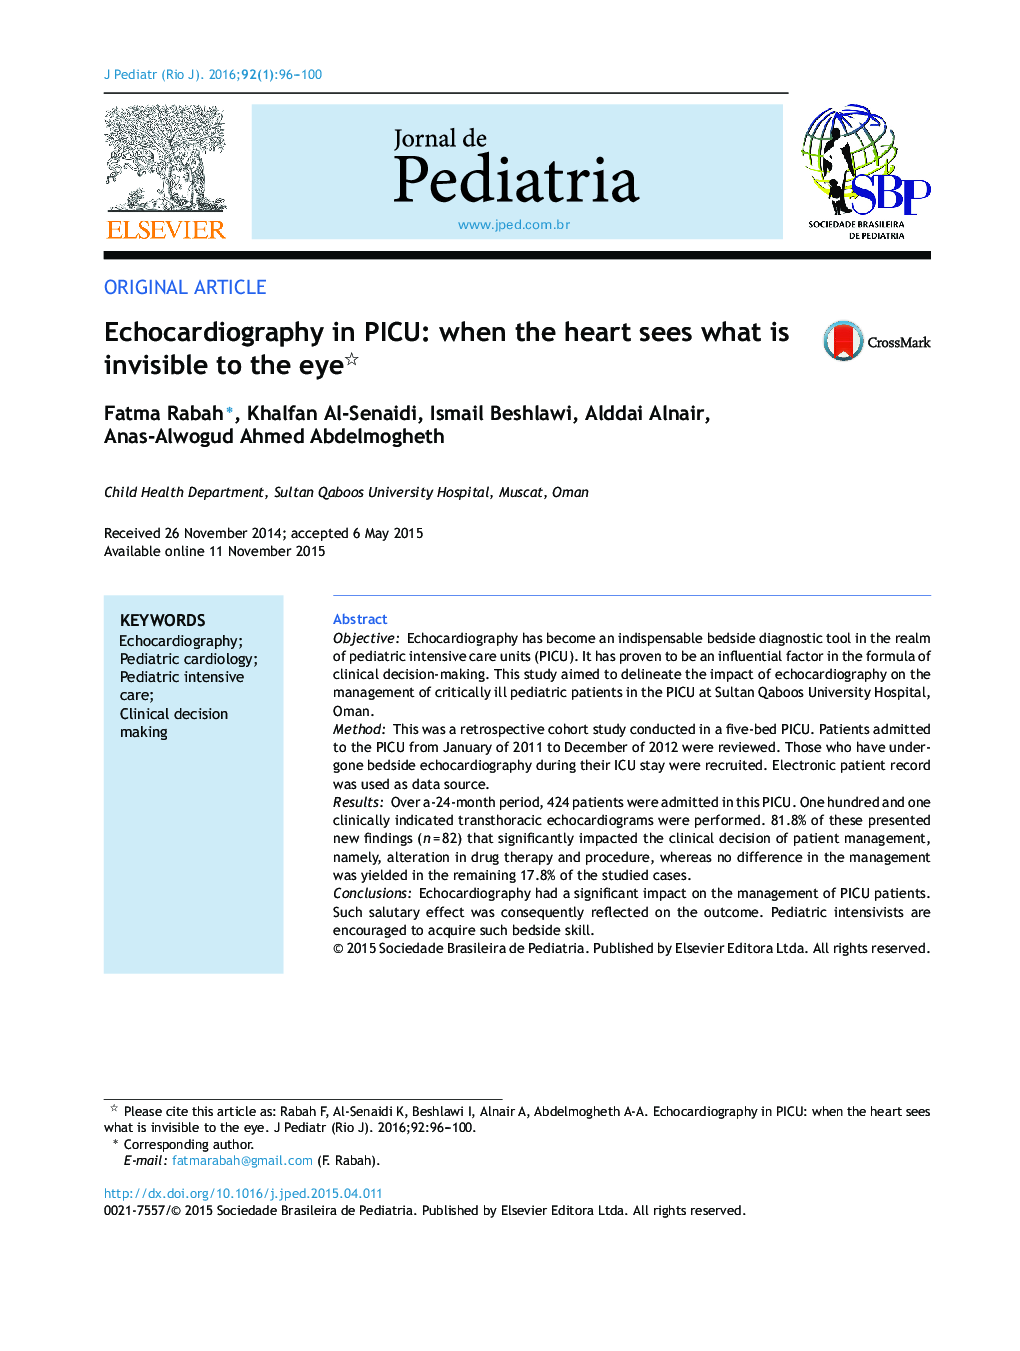 Echocardiography in PICU: when the heart sees what is invisible to the eye 